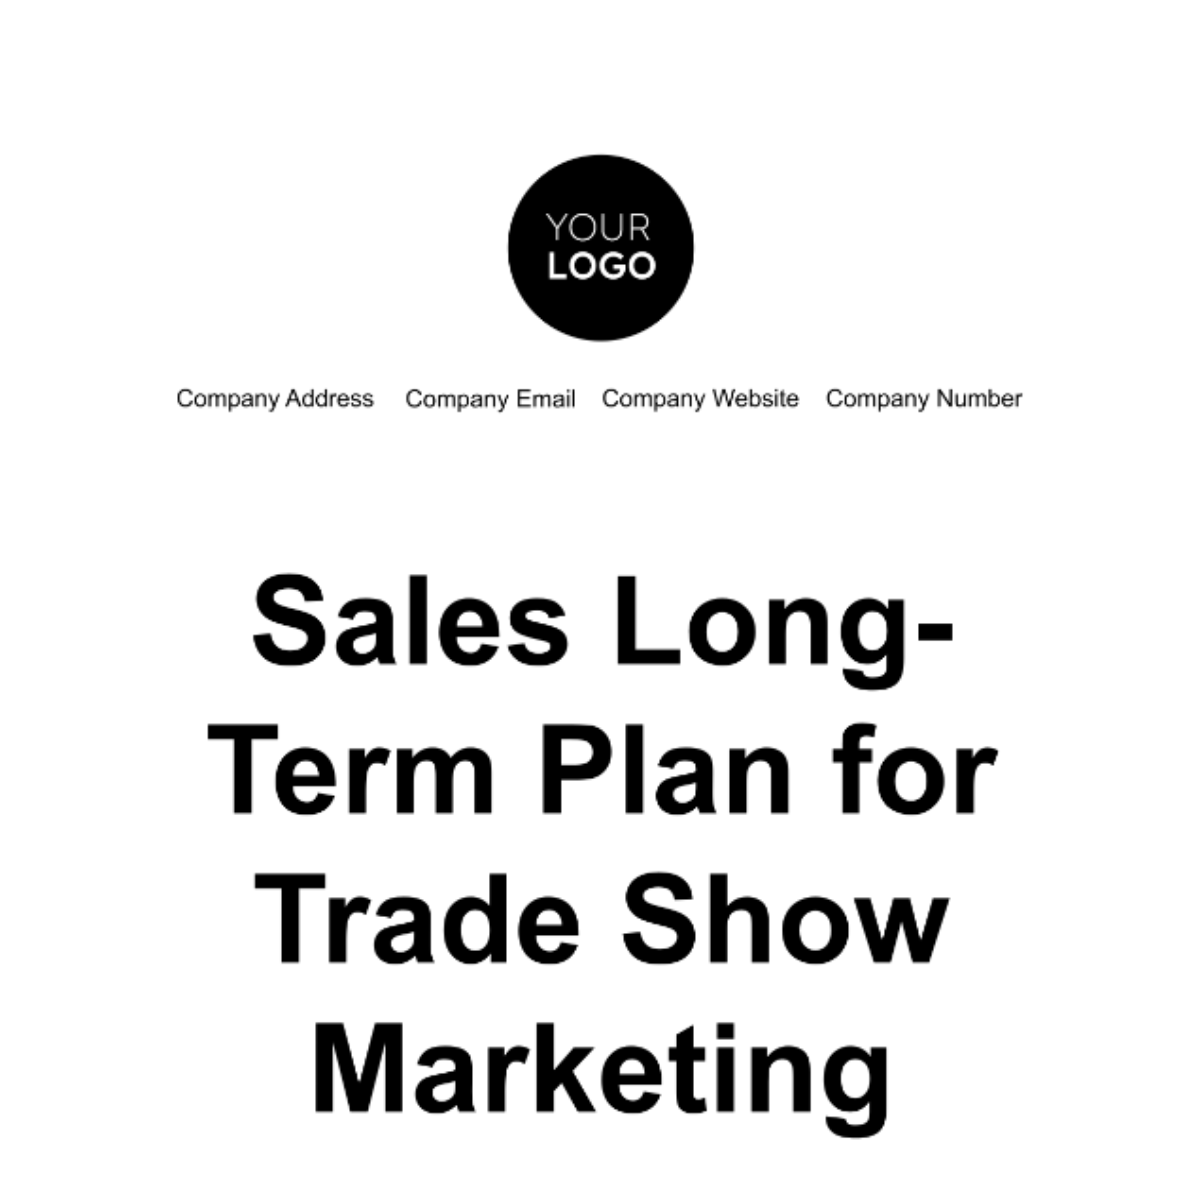 Free Sales Long-Term Plan for Trade Show Marketing Template